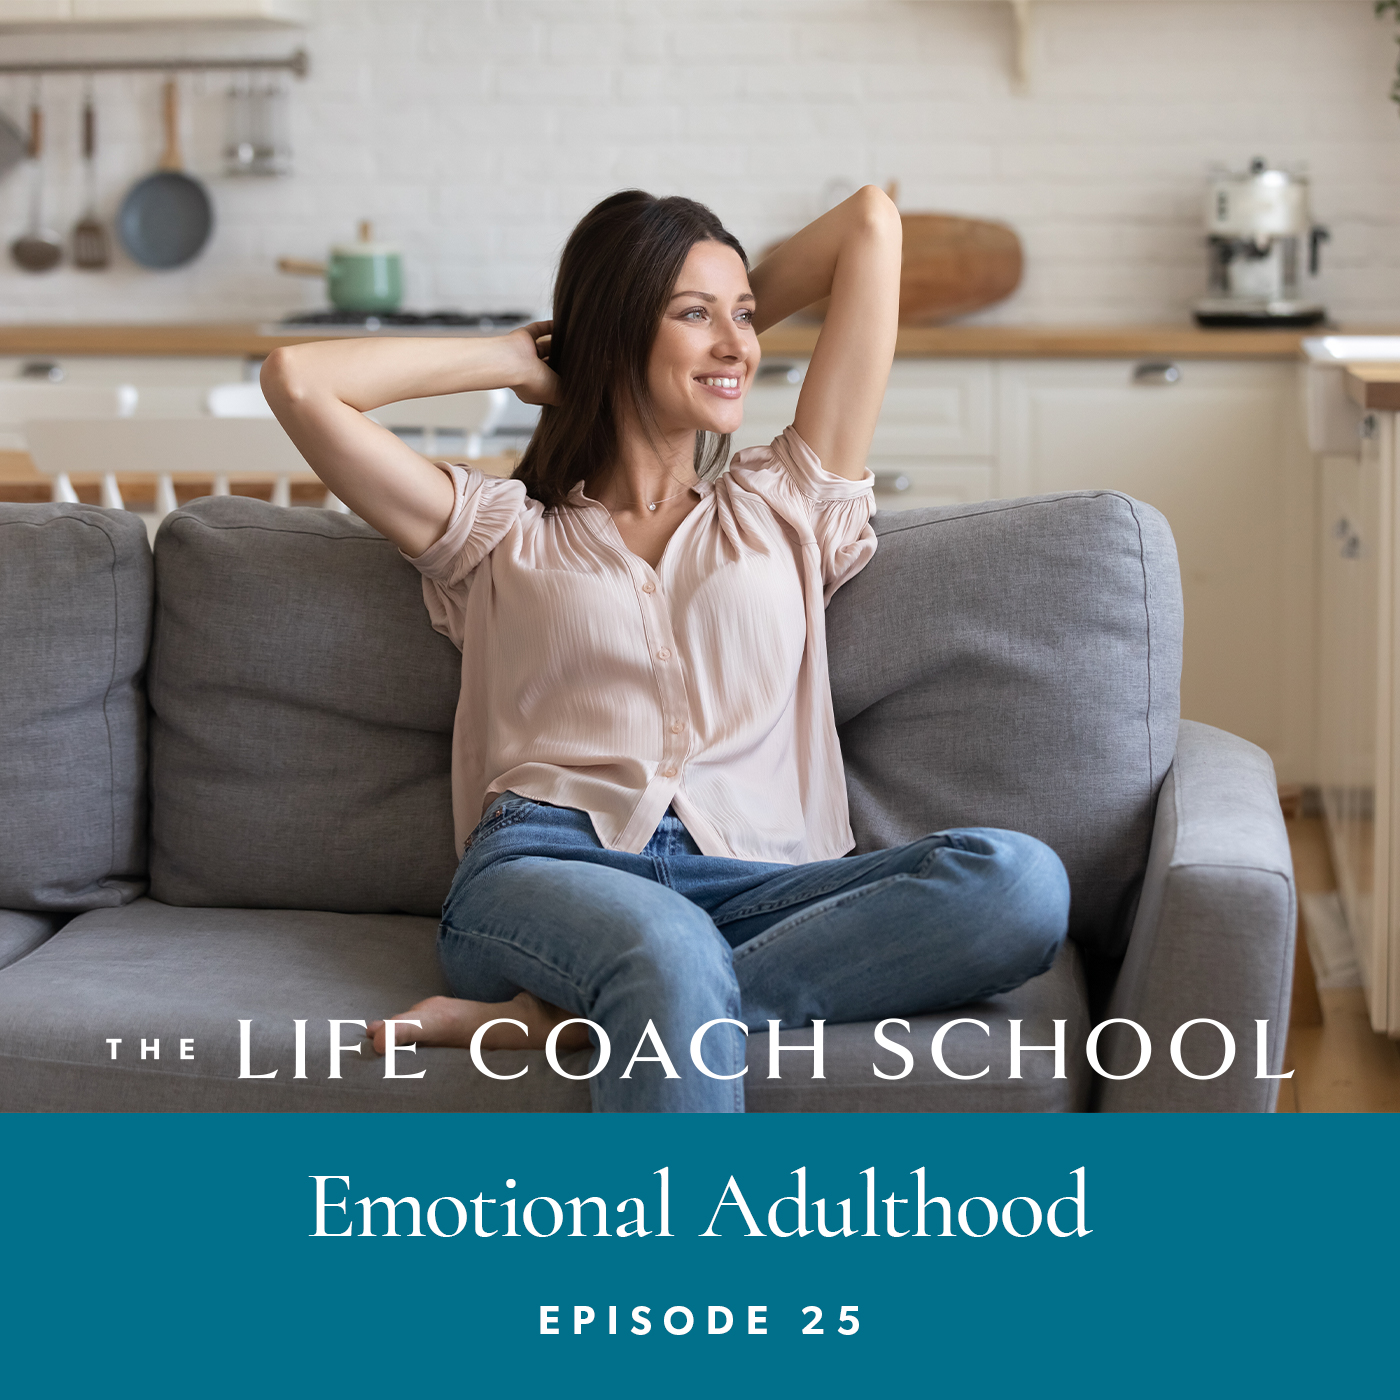 The Life Coach School Podcast with Brooke Castillo | Episode 25 | Emotional Adulthood